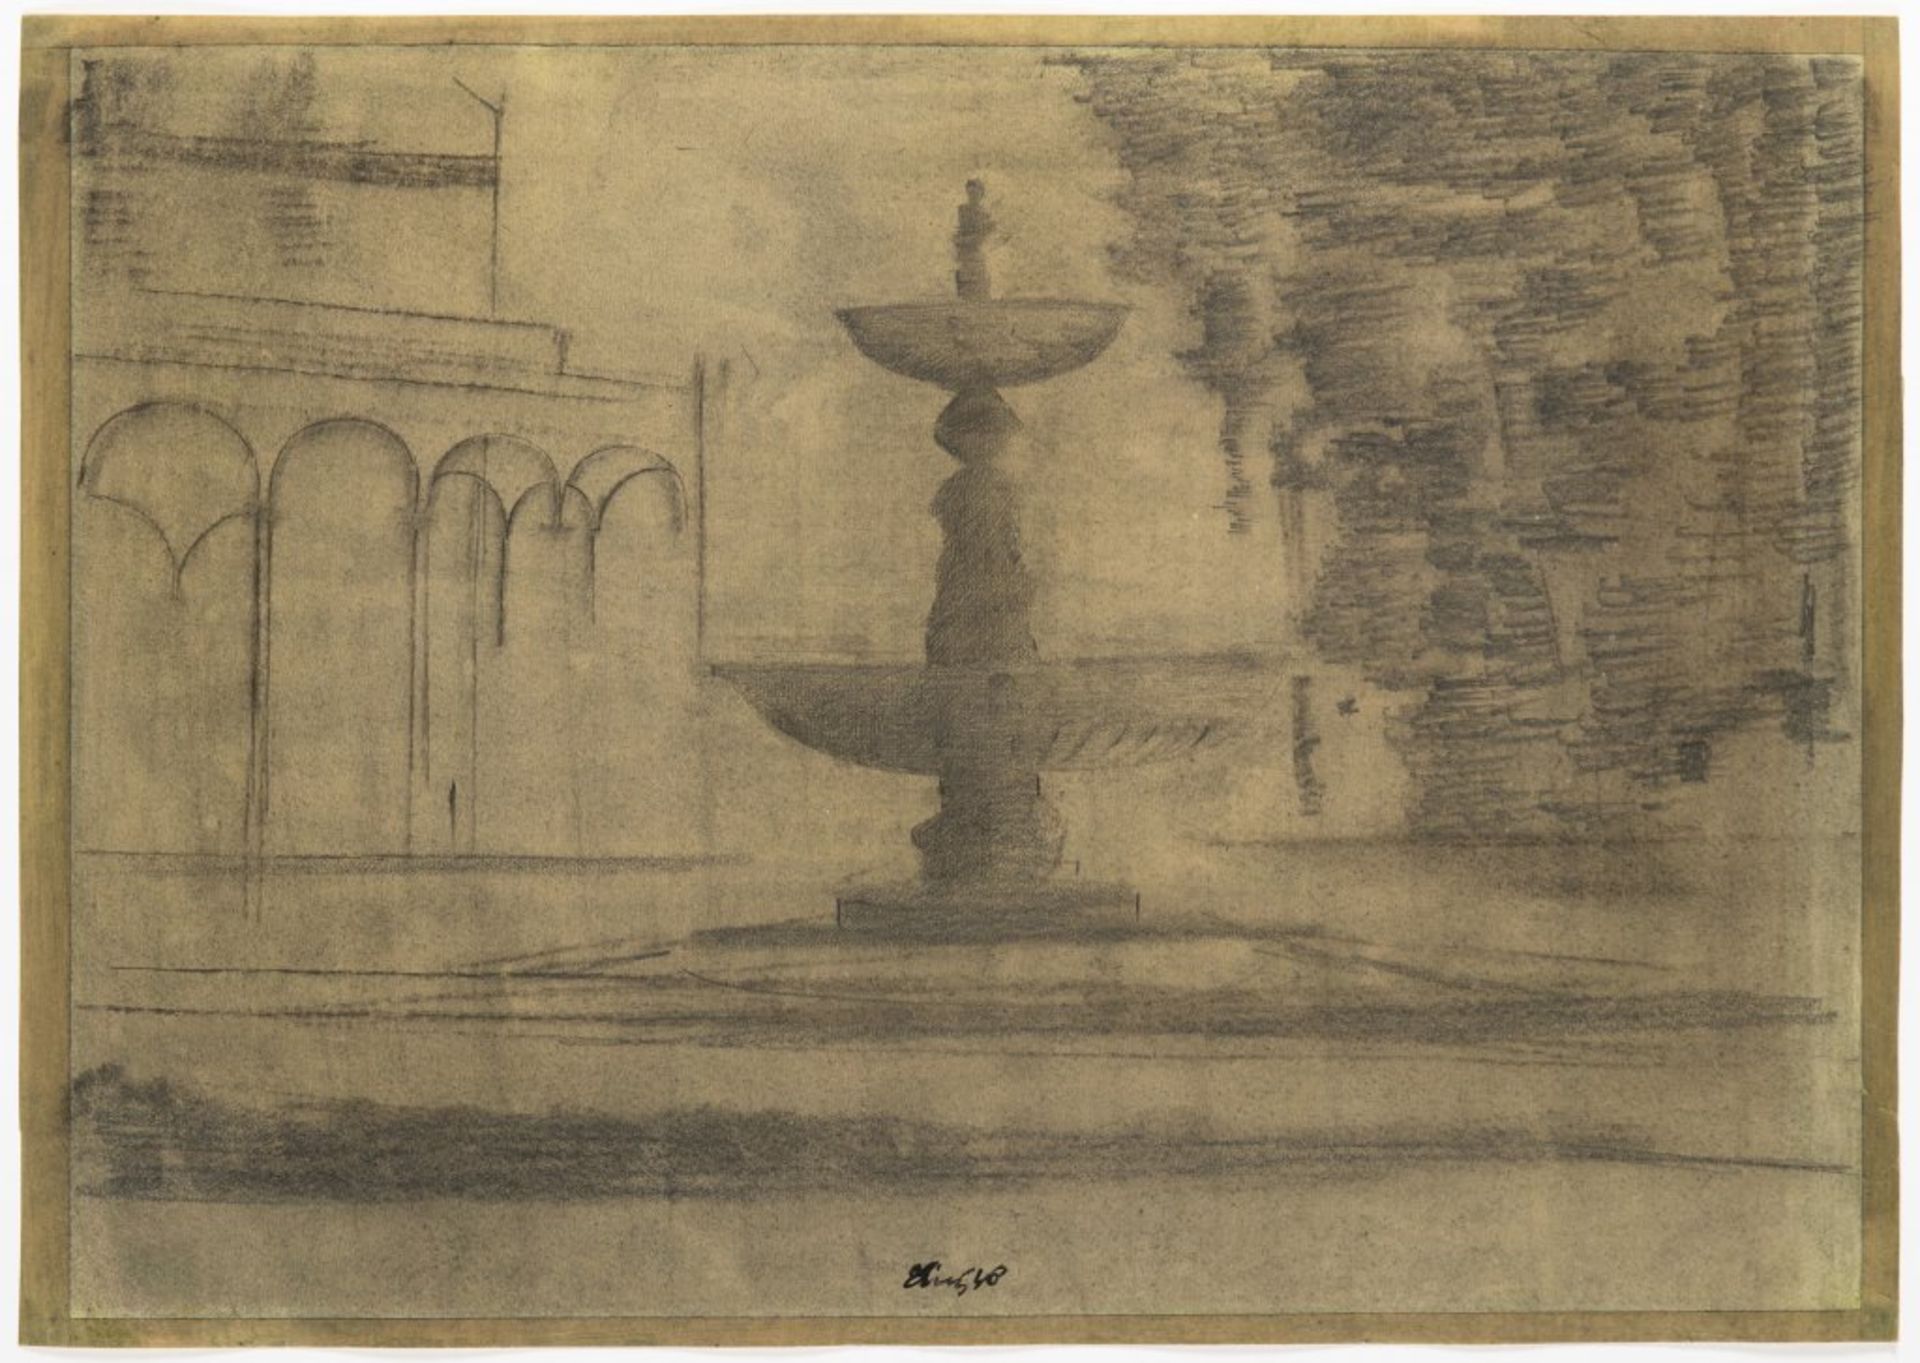 FRANTIŠEK TICHÝ 1896 - 1961: BELVEDERE WITH FOUNTAIN 1946 Pencil and charcoal on paper 36,5 x 53